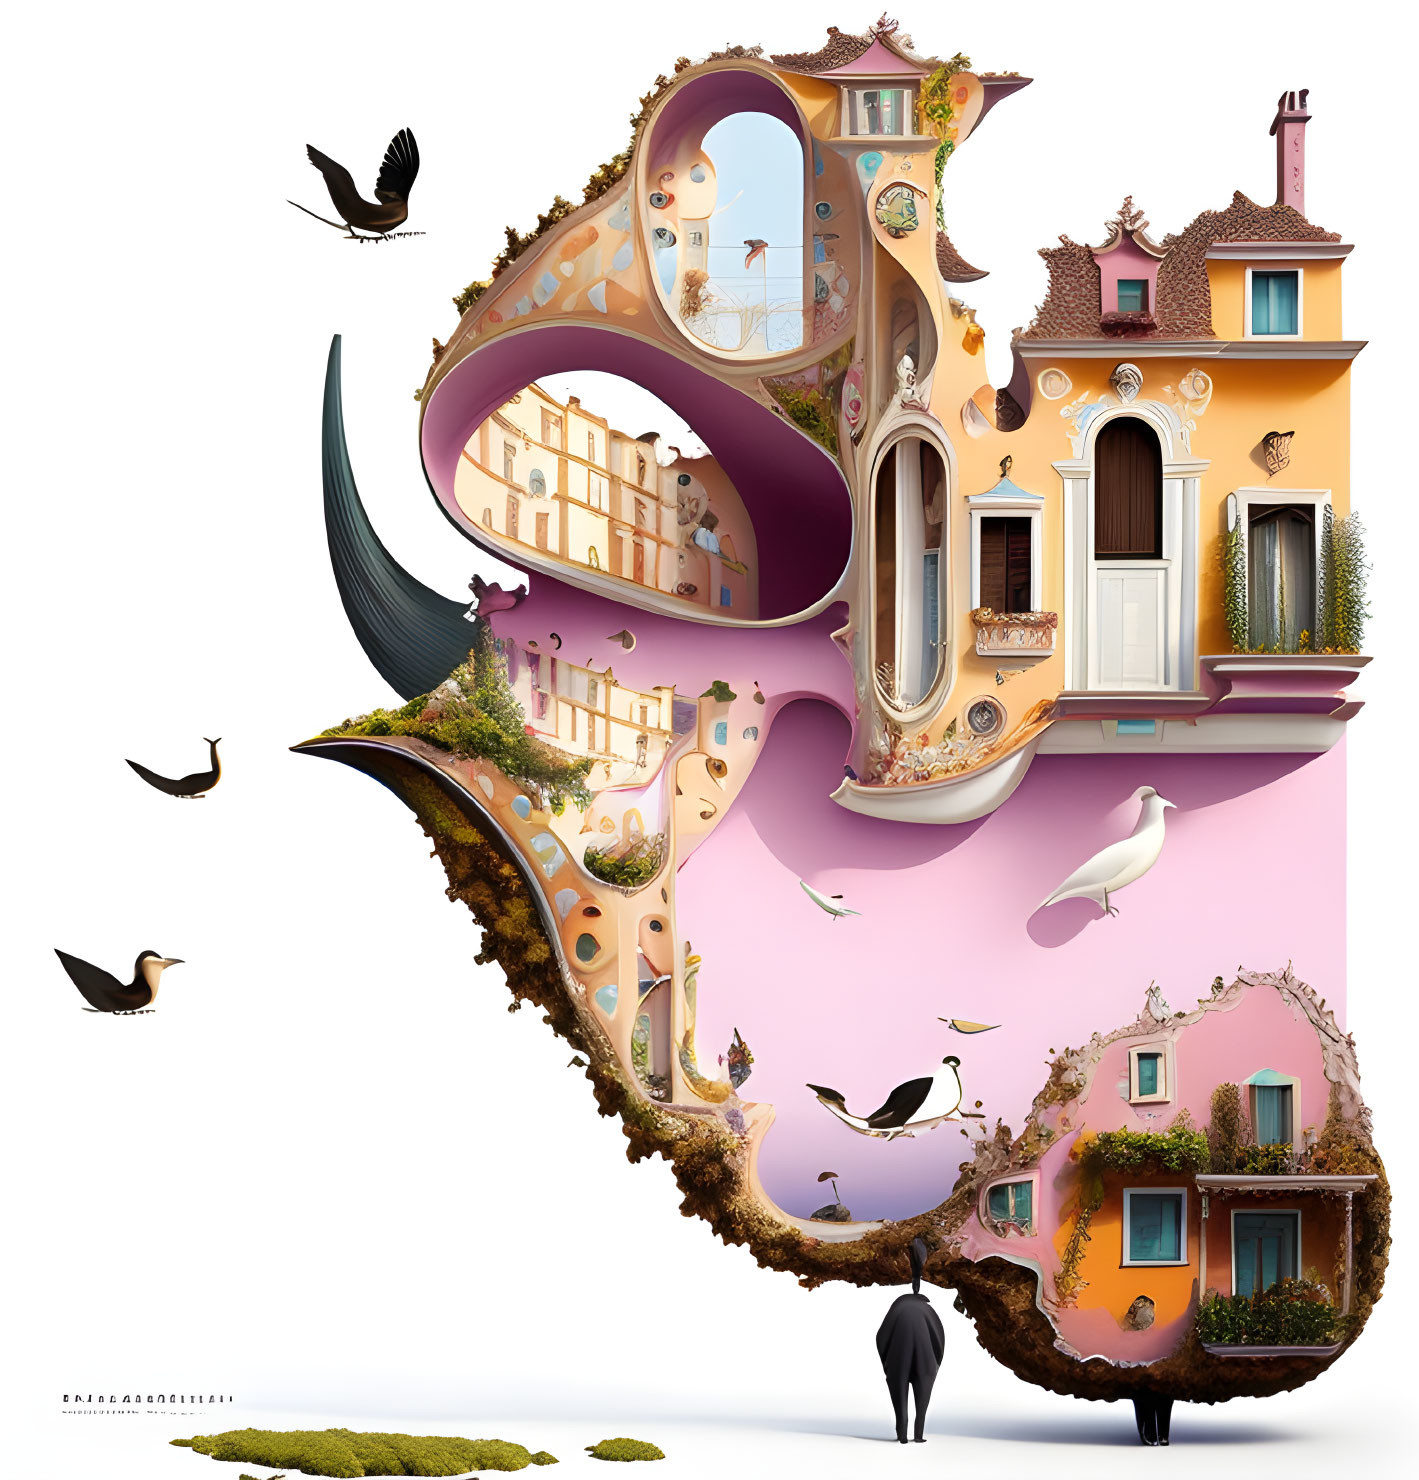 Whimsical surreal artwork blending building and musical instrument with birds and figure